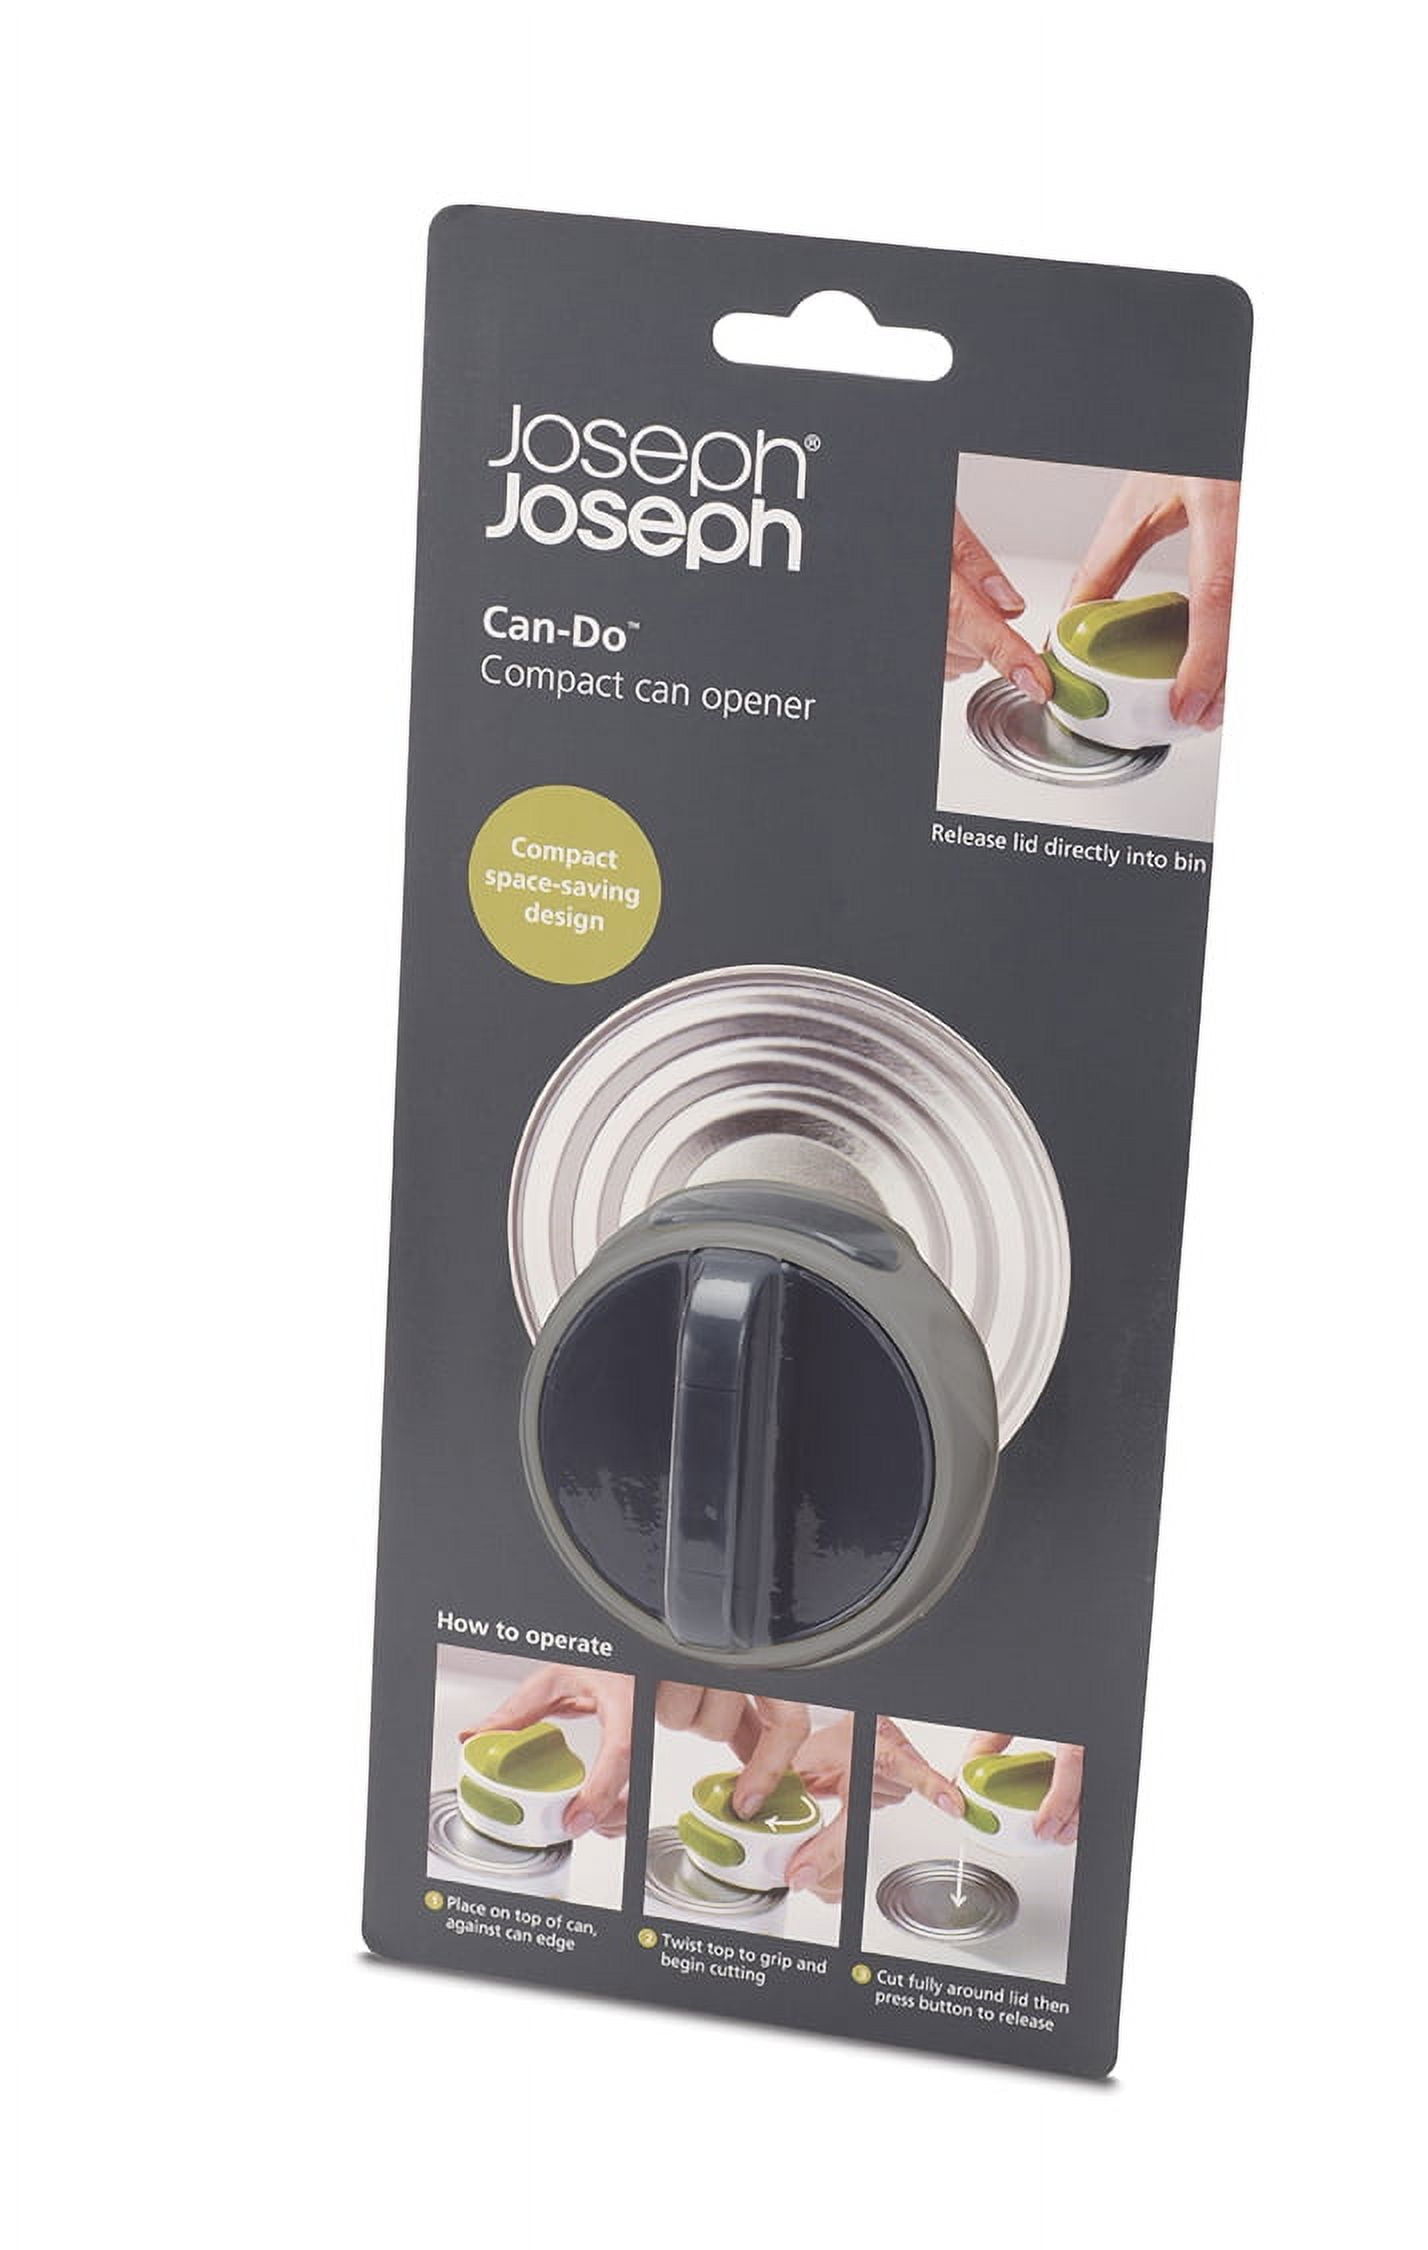  Joseph Joseph Can-Do Compact Can Opener Easy Twist Release  Portable Space-Saving Manual Stainless Steel, Green : Home & Kitchen